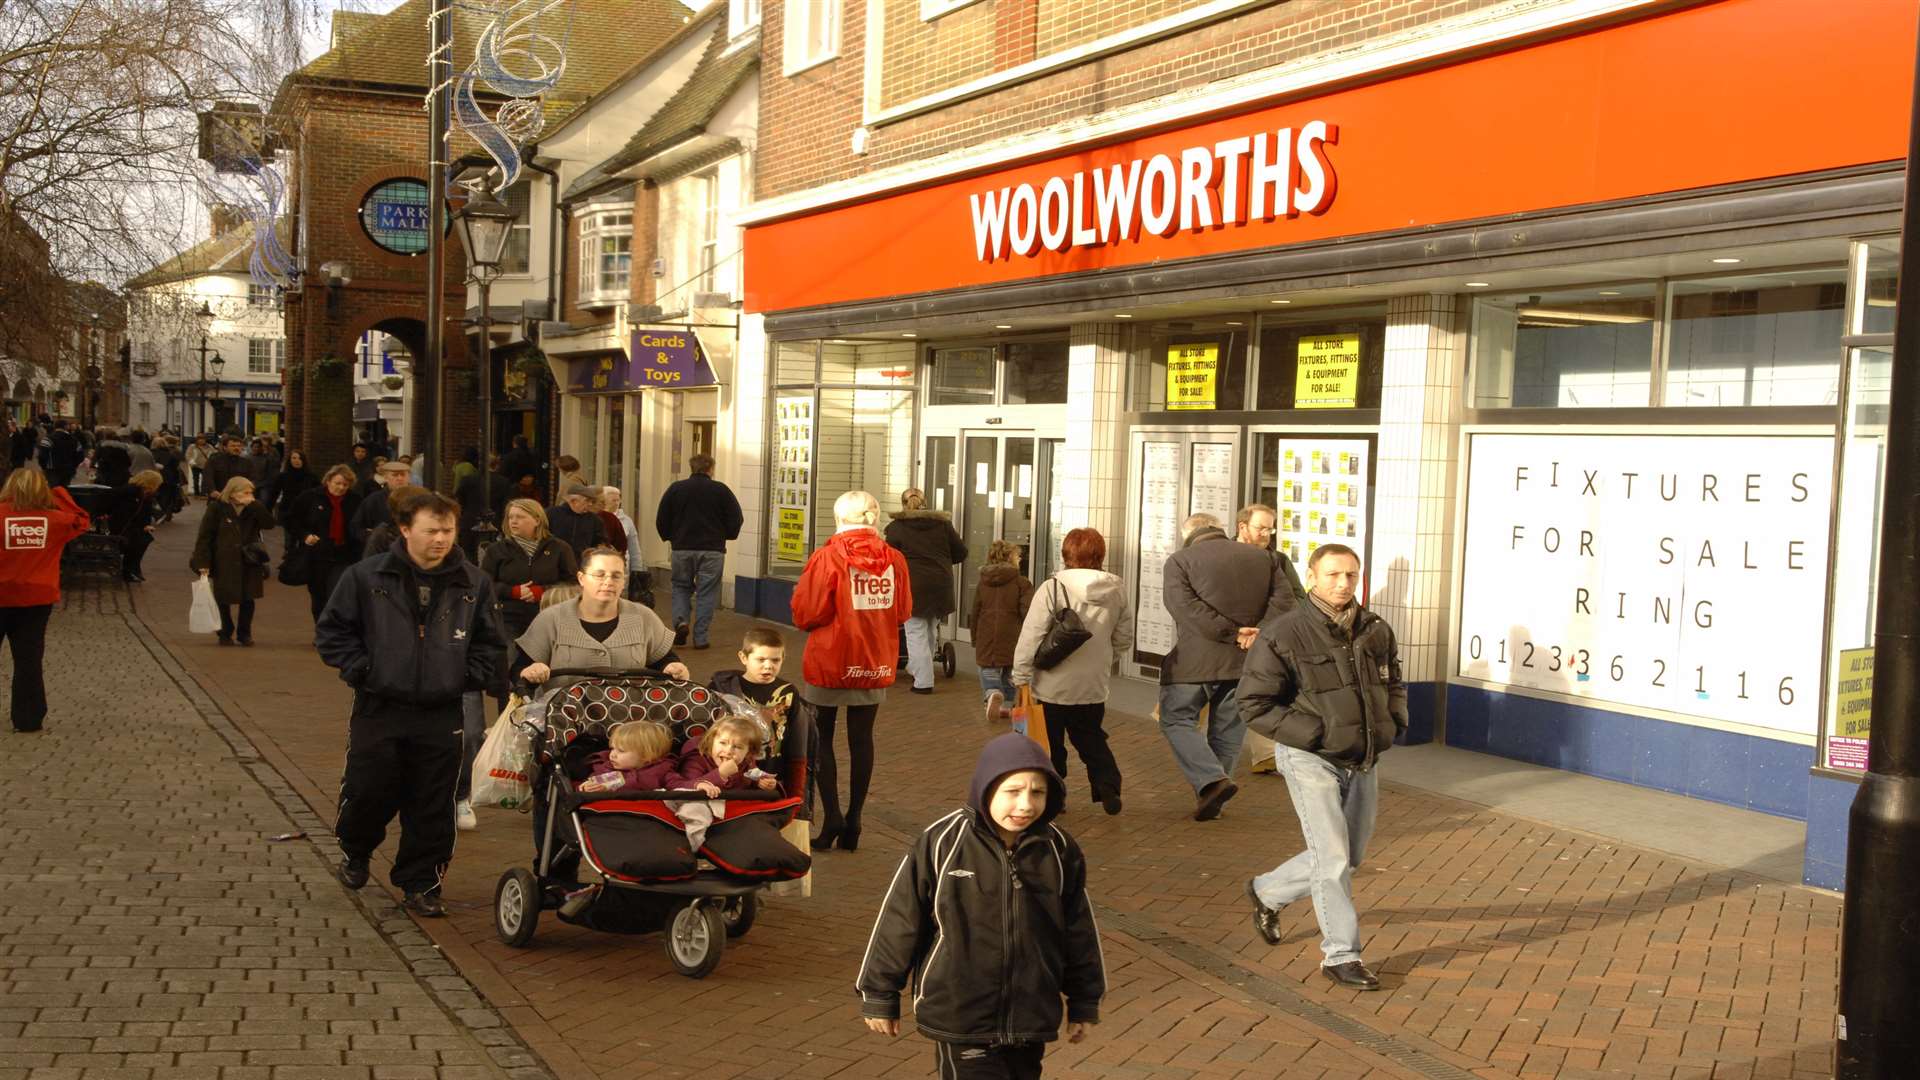 Woolworths shut up shop on New Year’s Eve in 2008